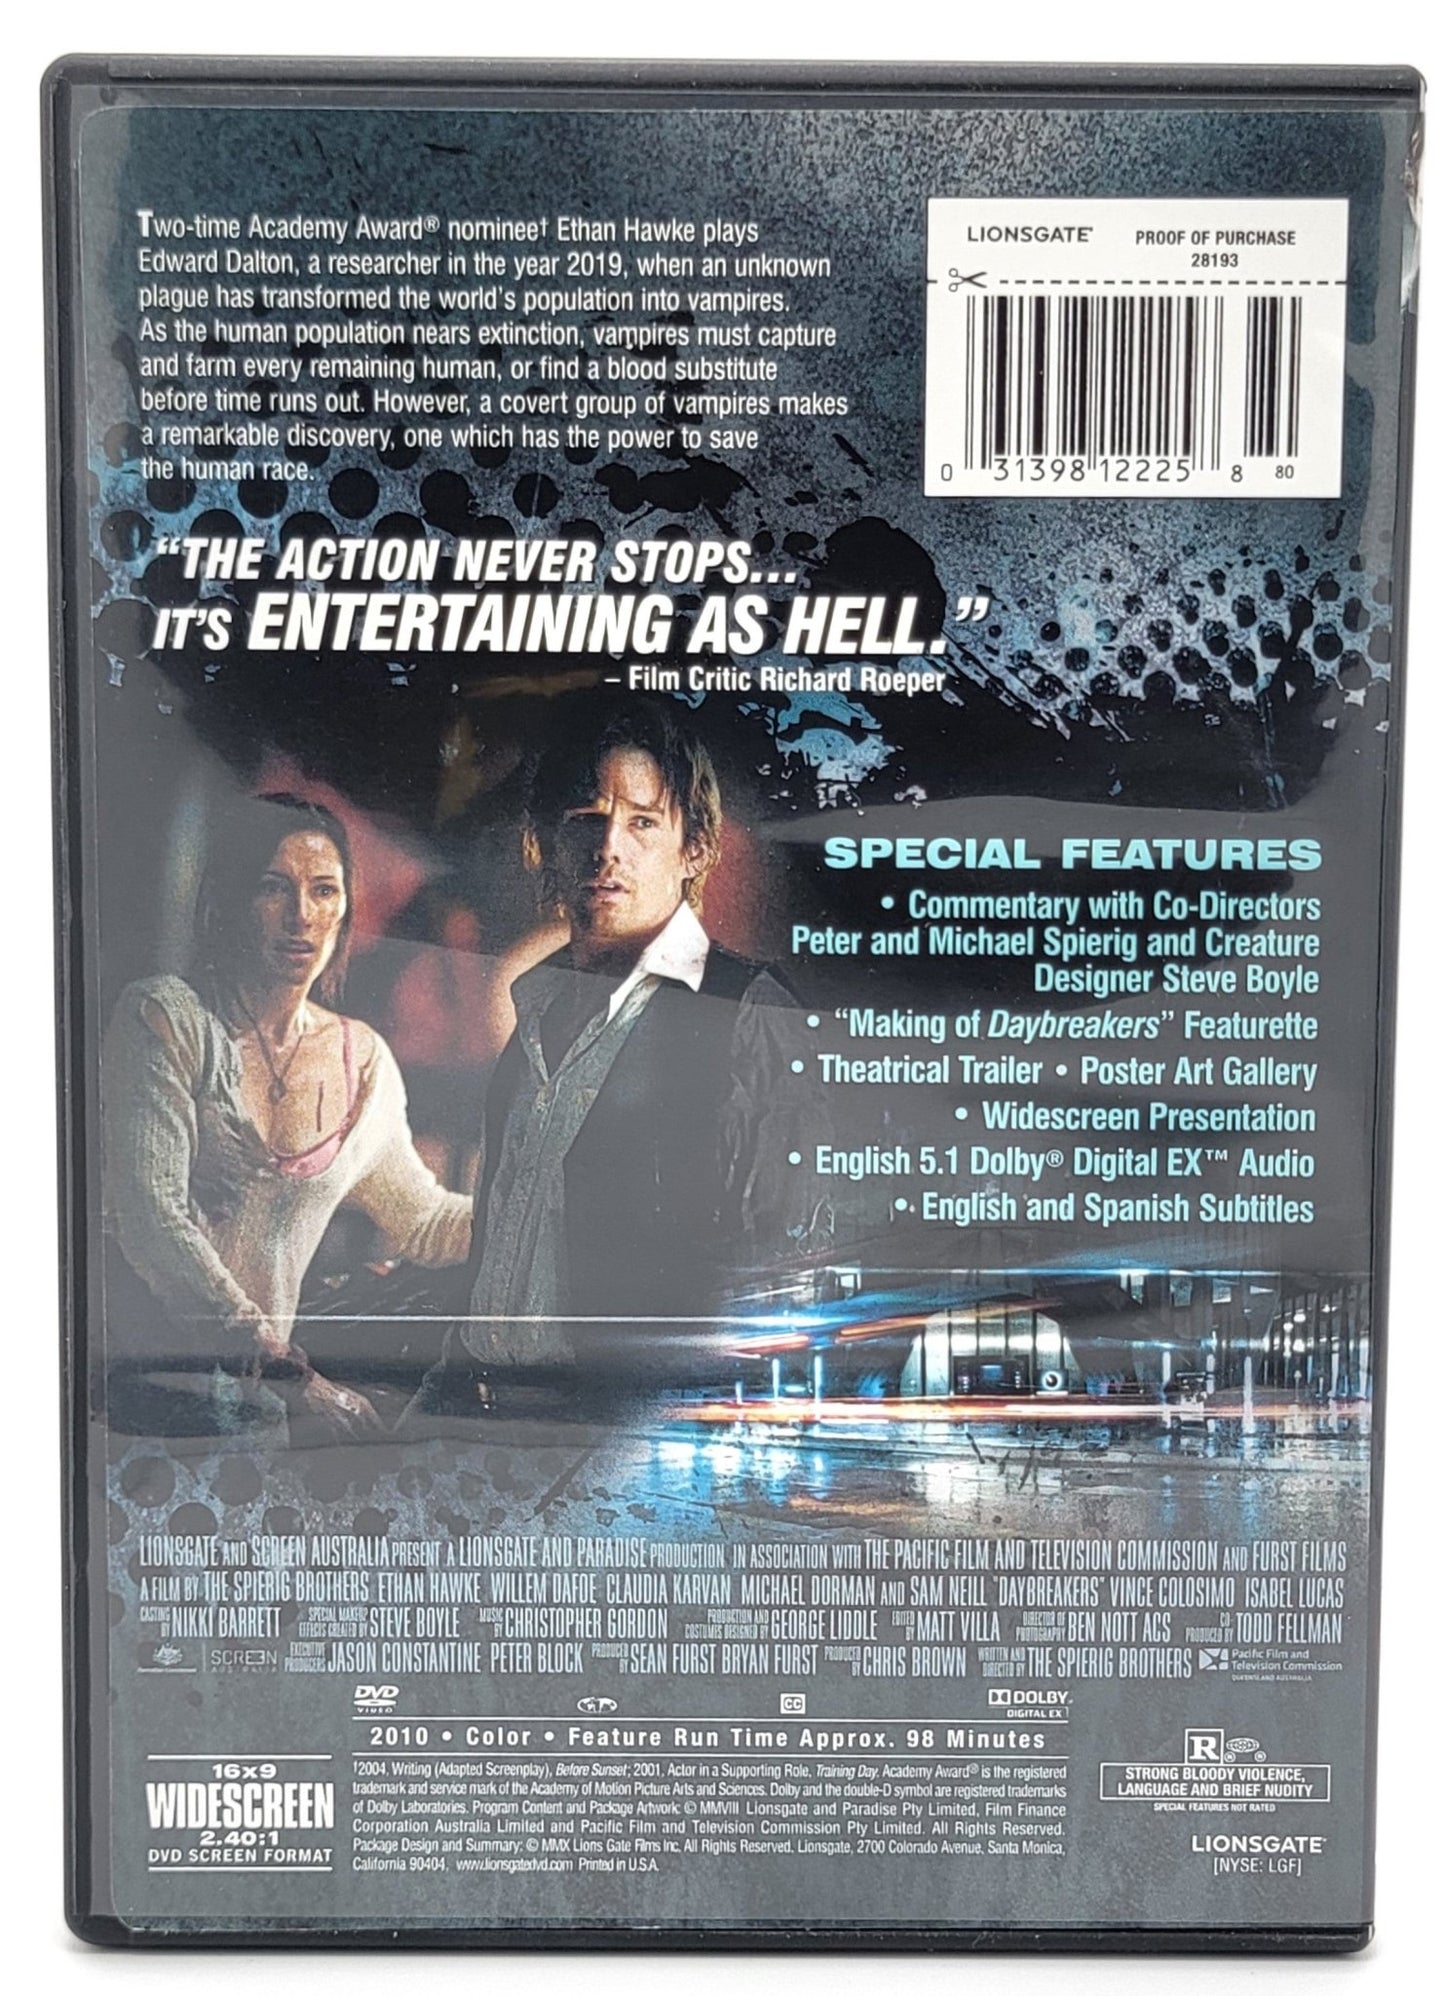 Lionsgate Home Entertainment - Daybreakers The Battle for Blood Begins | DVD | Widescreen - DVD - Steady Bunny Shop